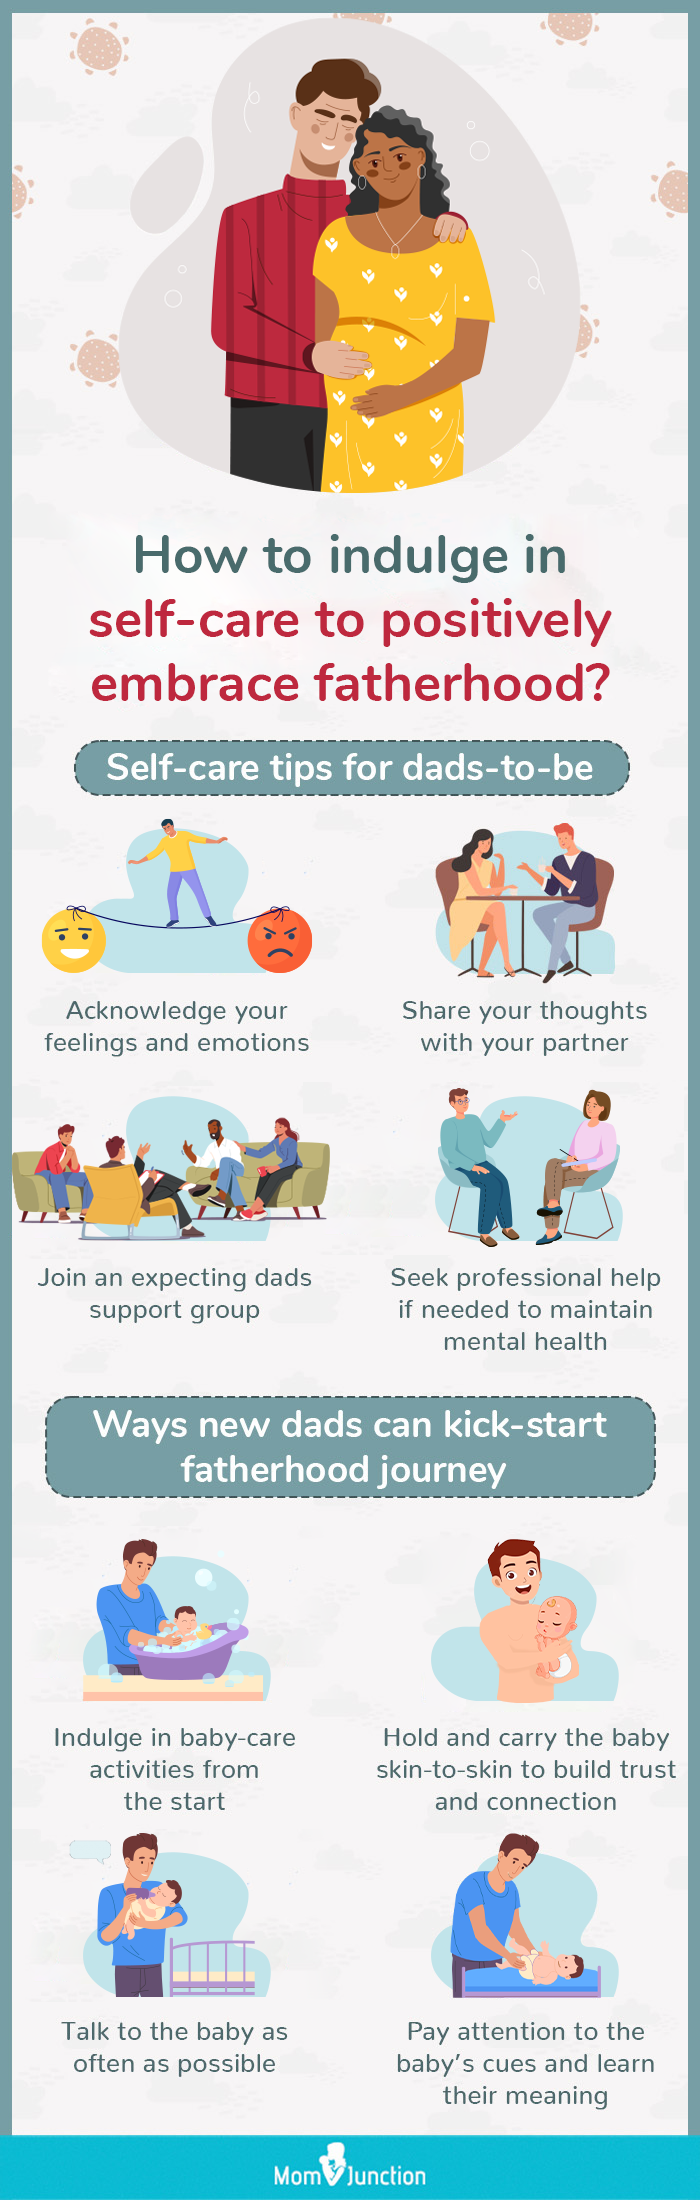 fatherhood caring for self and the baby (infographic)